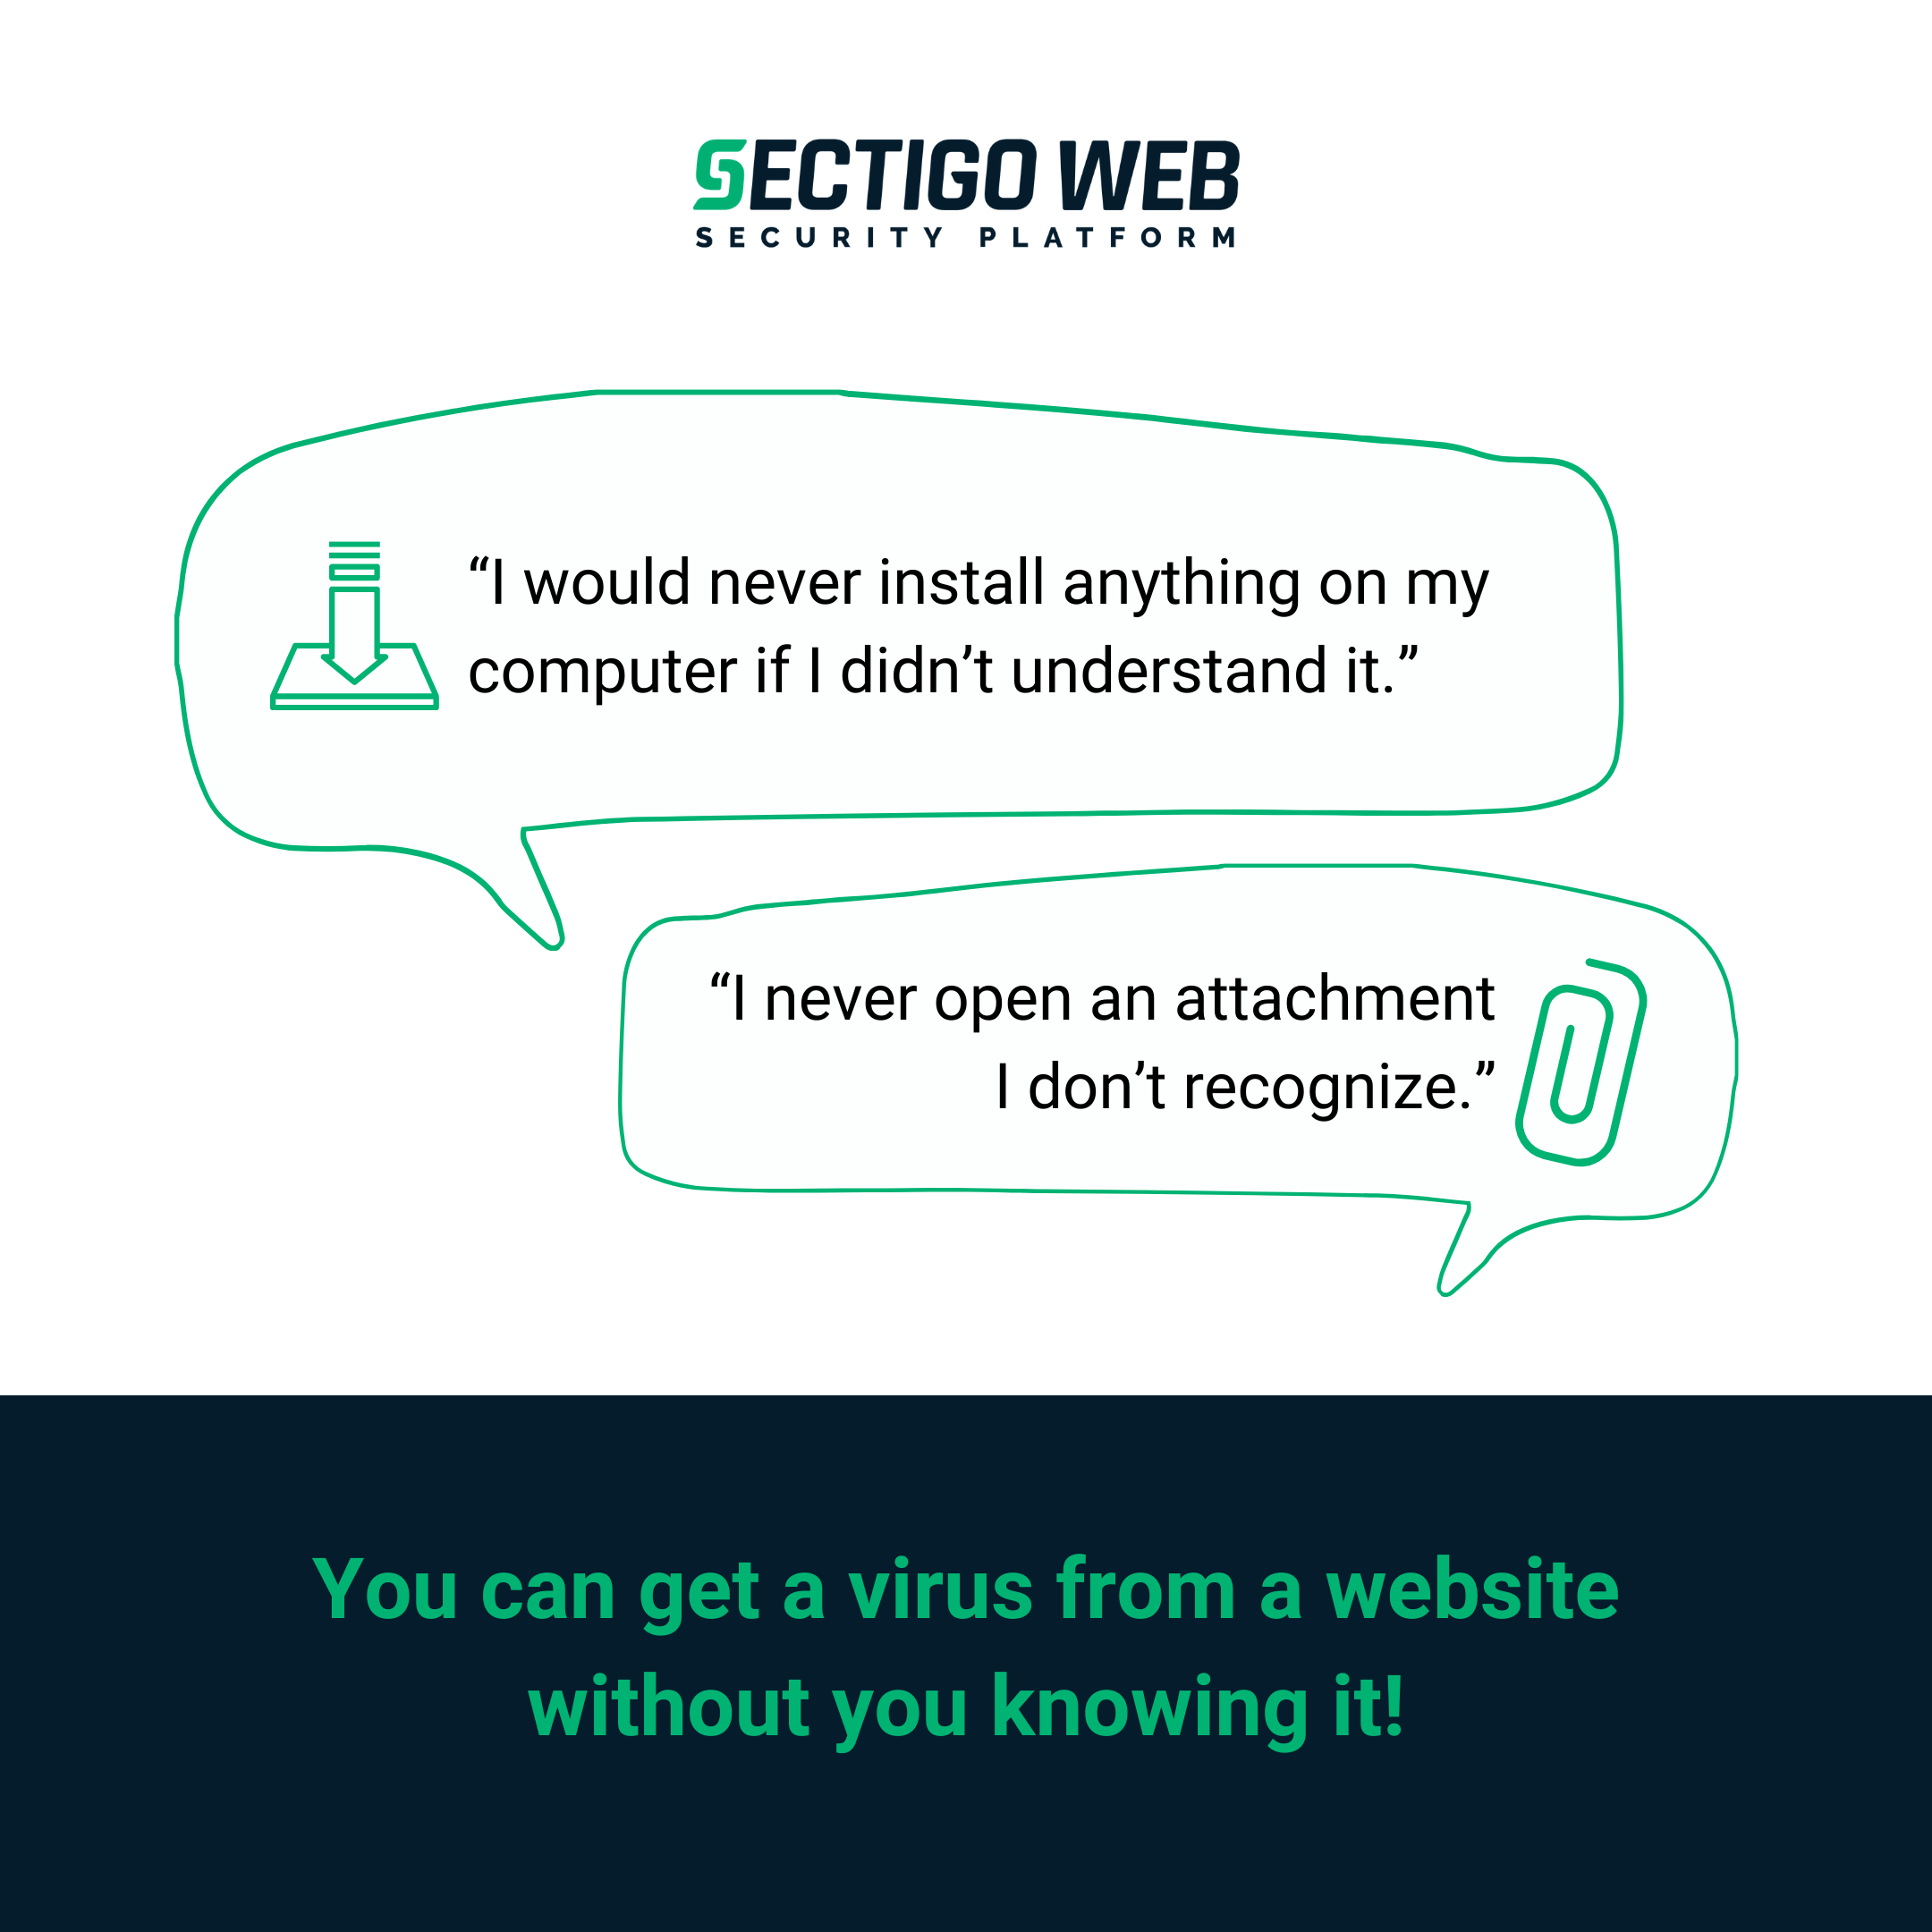 You can get a virus from a website without you knowing it!